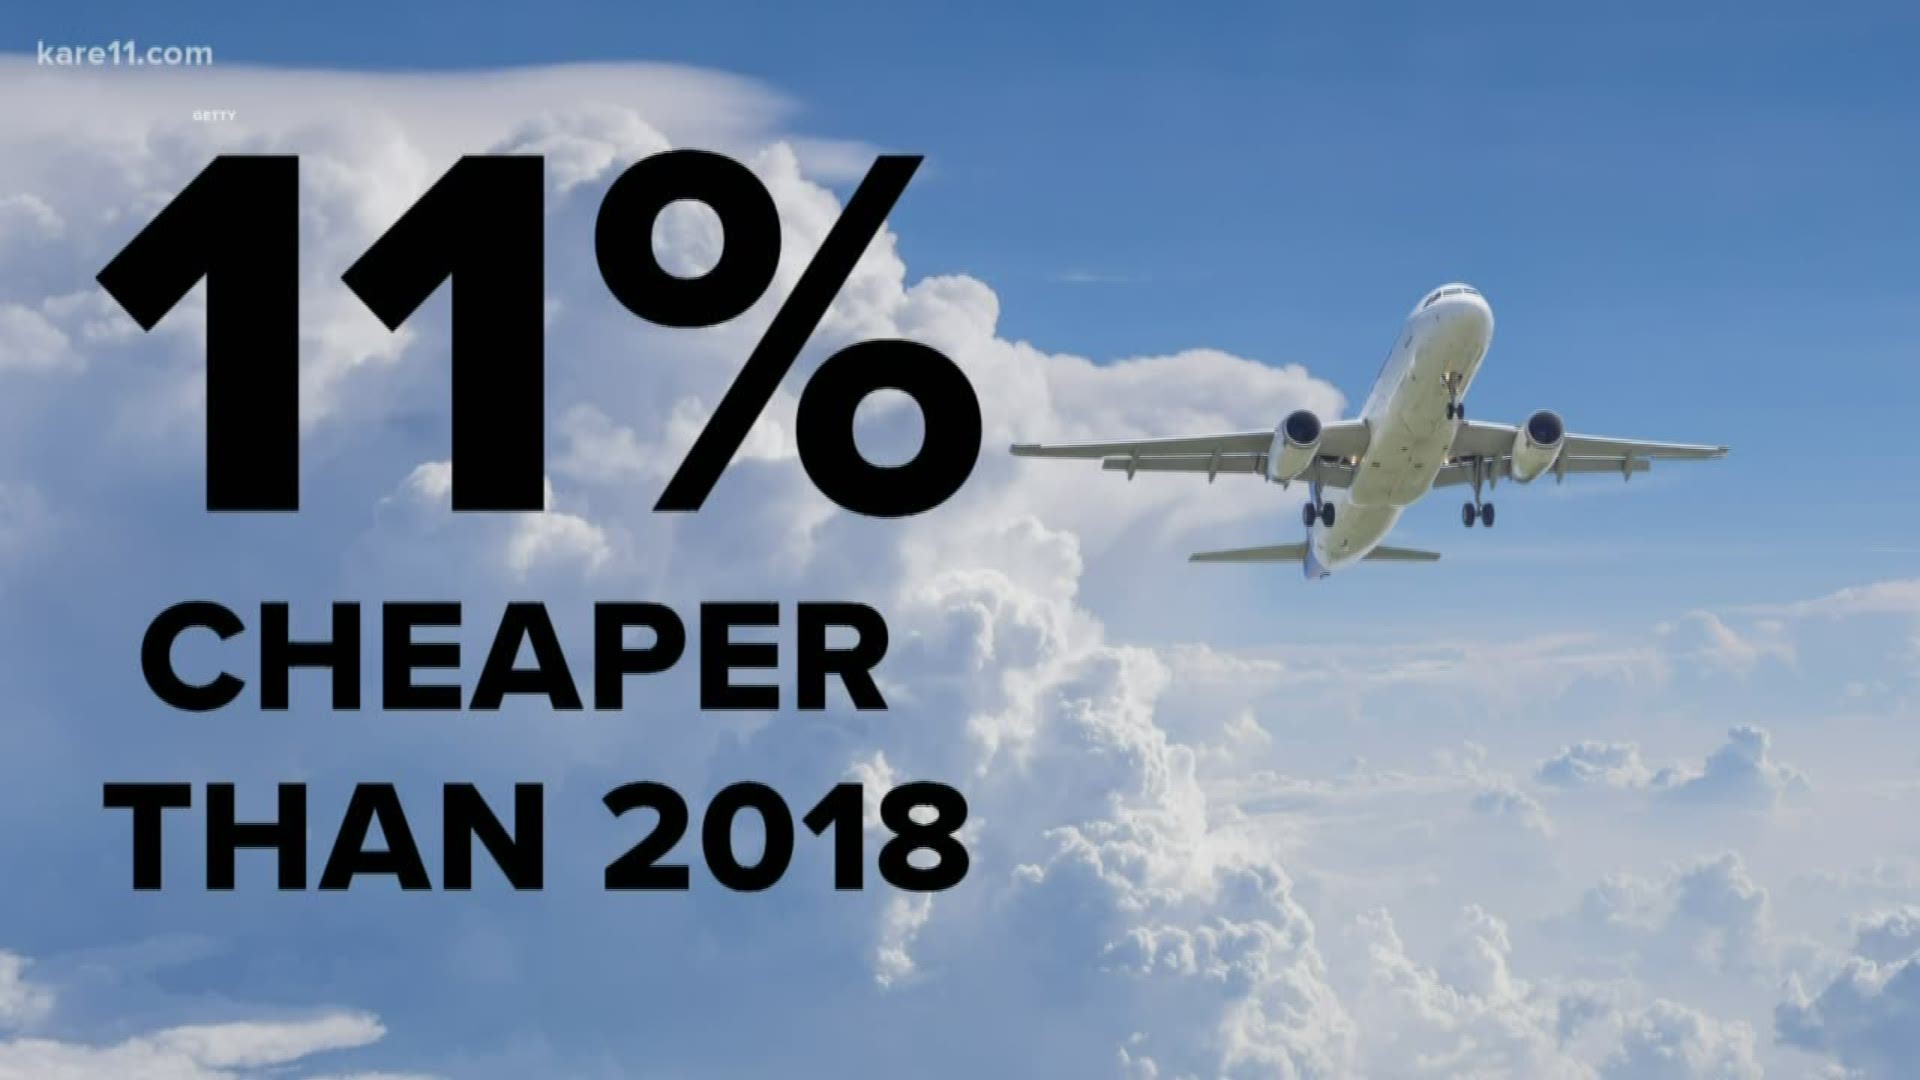 Travel experts say flights in January 2020 will be 11% cheaper than they were last January, the cheapest since 2013.